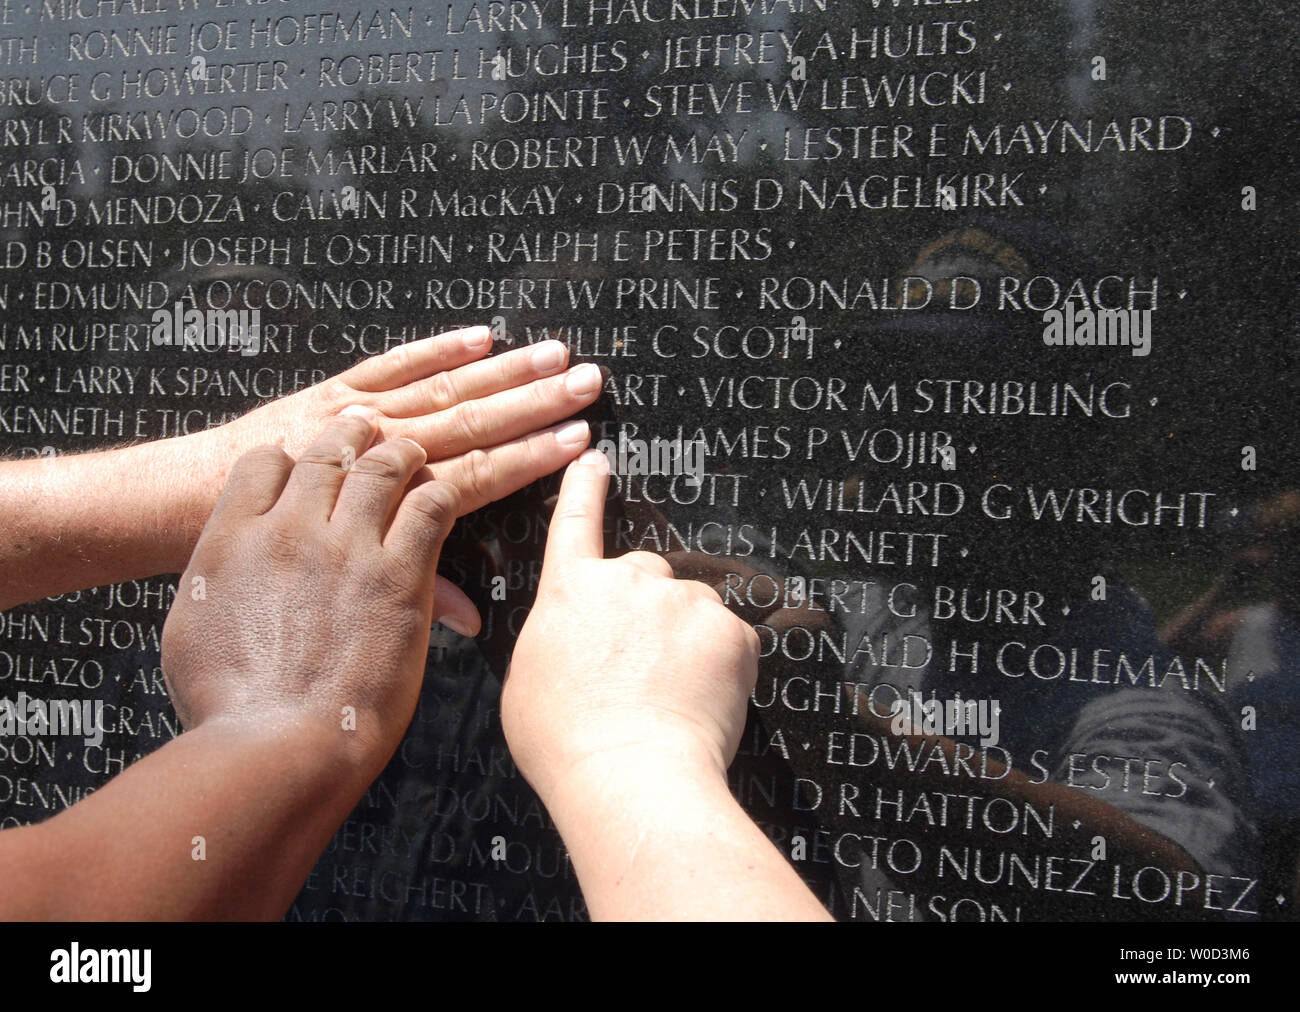 Vietnam Veterans John Broton, Cloise Orand and Leonard 'Doc' Brooks search for the names of their fallen comrades, who were killed during an ambush in Vietnam in 1968, at the Vietnam Veterans Memorial in Washington on May 29, 2006. (UPI Photo/Kevin Dietsch) Stock Photo